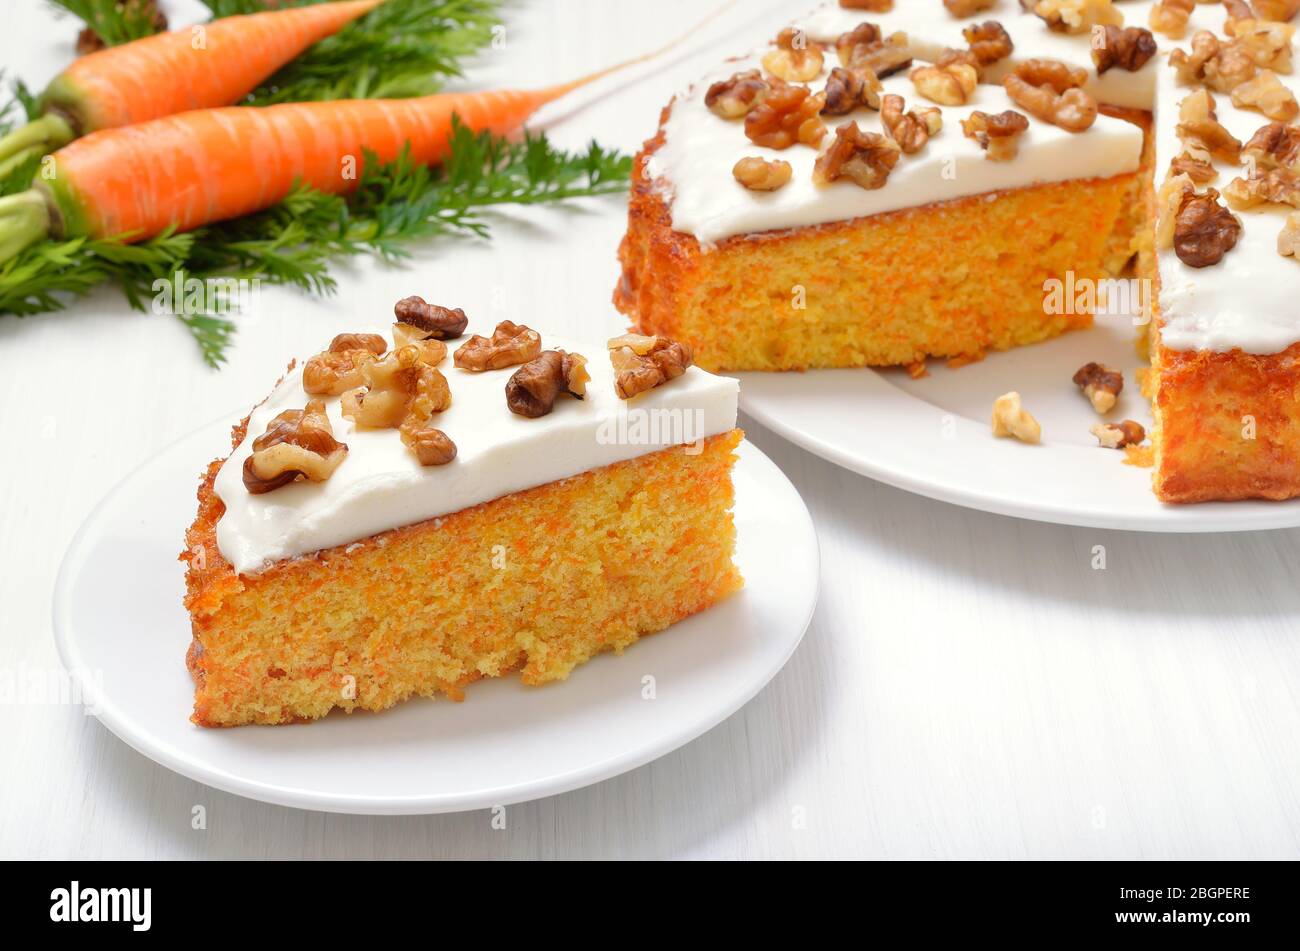 Appetizing piece of carrot cake on white plate Stock Photo